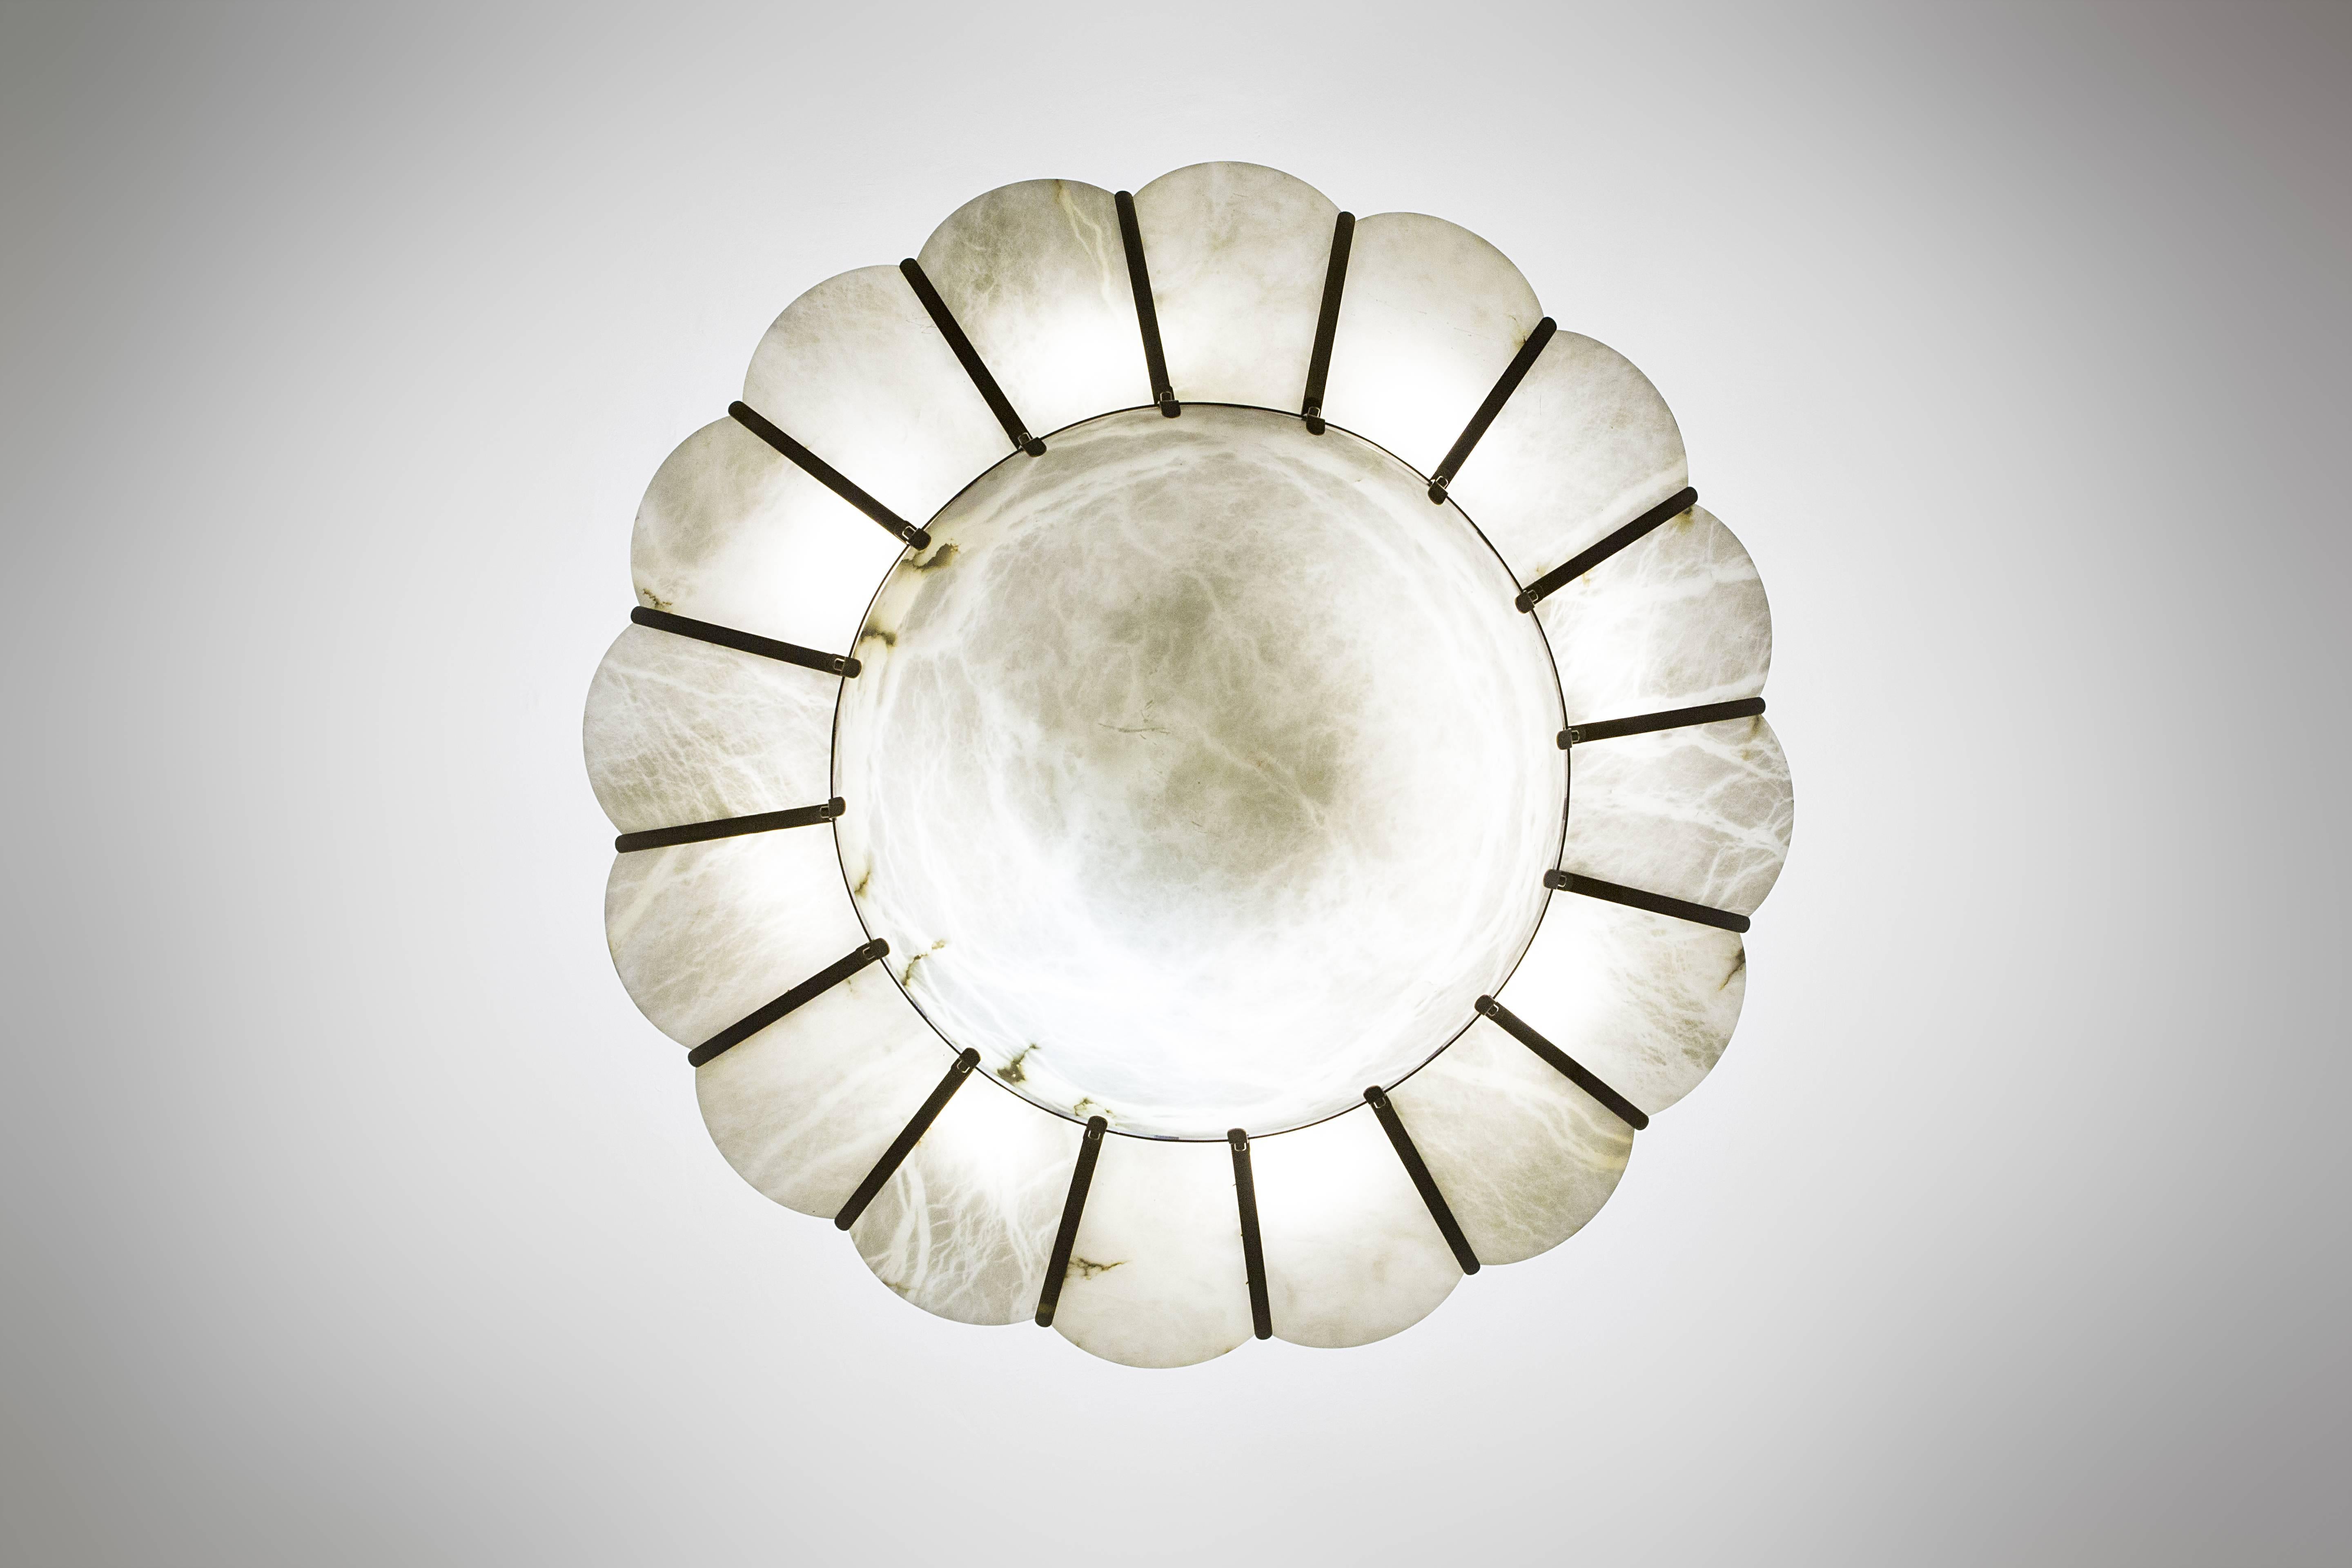 Luster, 
burnished brass and alabaster, 
circa 1960, Italy.
Measure: Height 50 cm, diameter 150 cm.